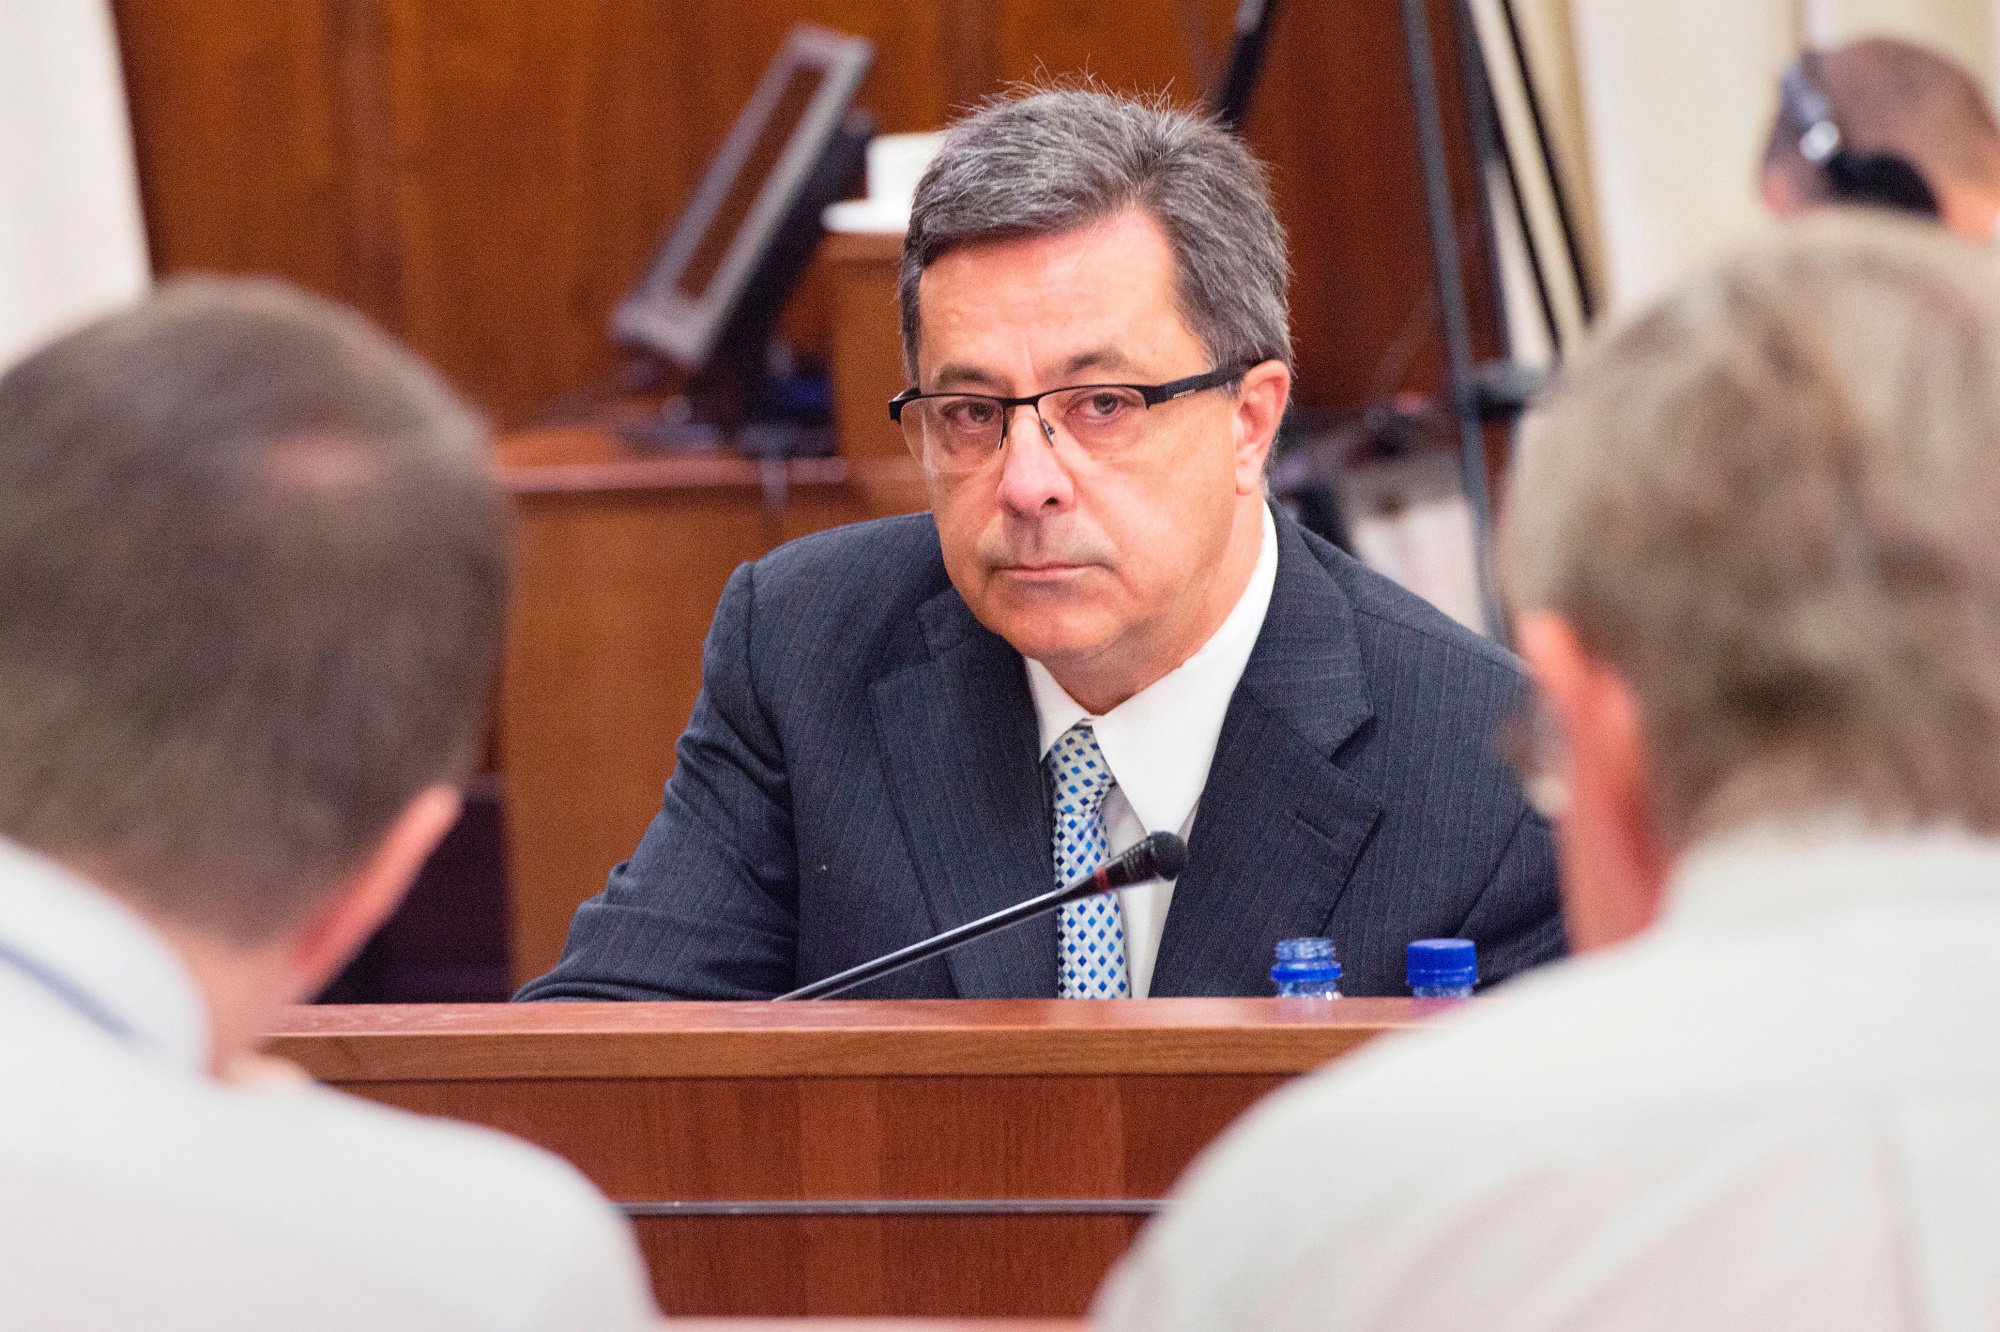 Markus Jooste gives testimony to a parliamentary committee in the South African Parliament in Sept. 2018.